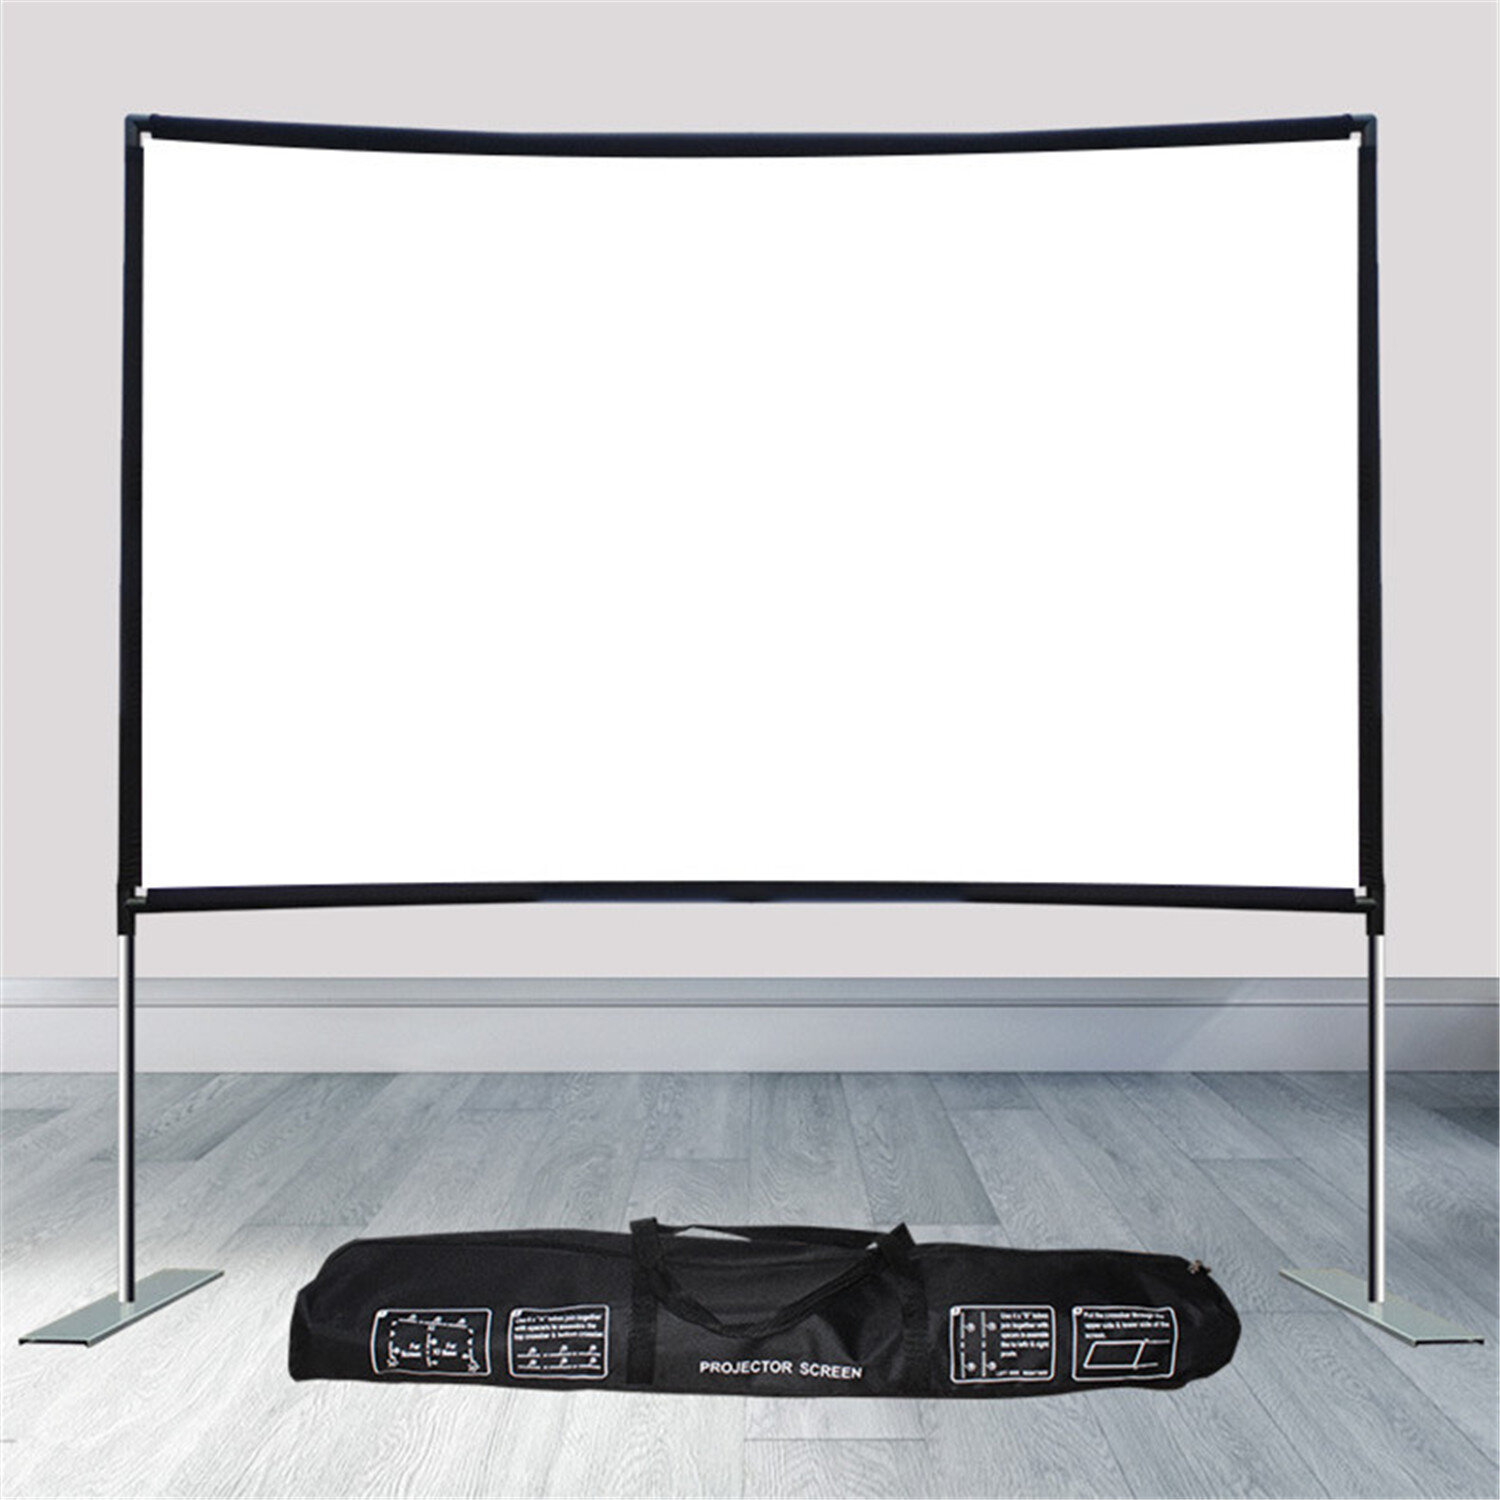 Yaheetech 100 inch Diagonal Portable Indoor Outdoor Projector Screen with Stand 16:9 Projection Screen w/ 87x49 inch Foldable Stand White 